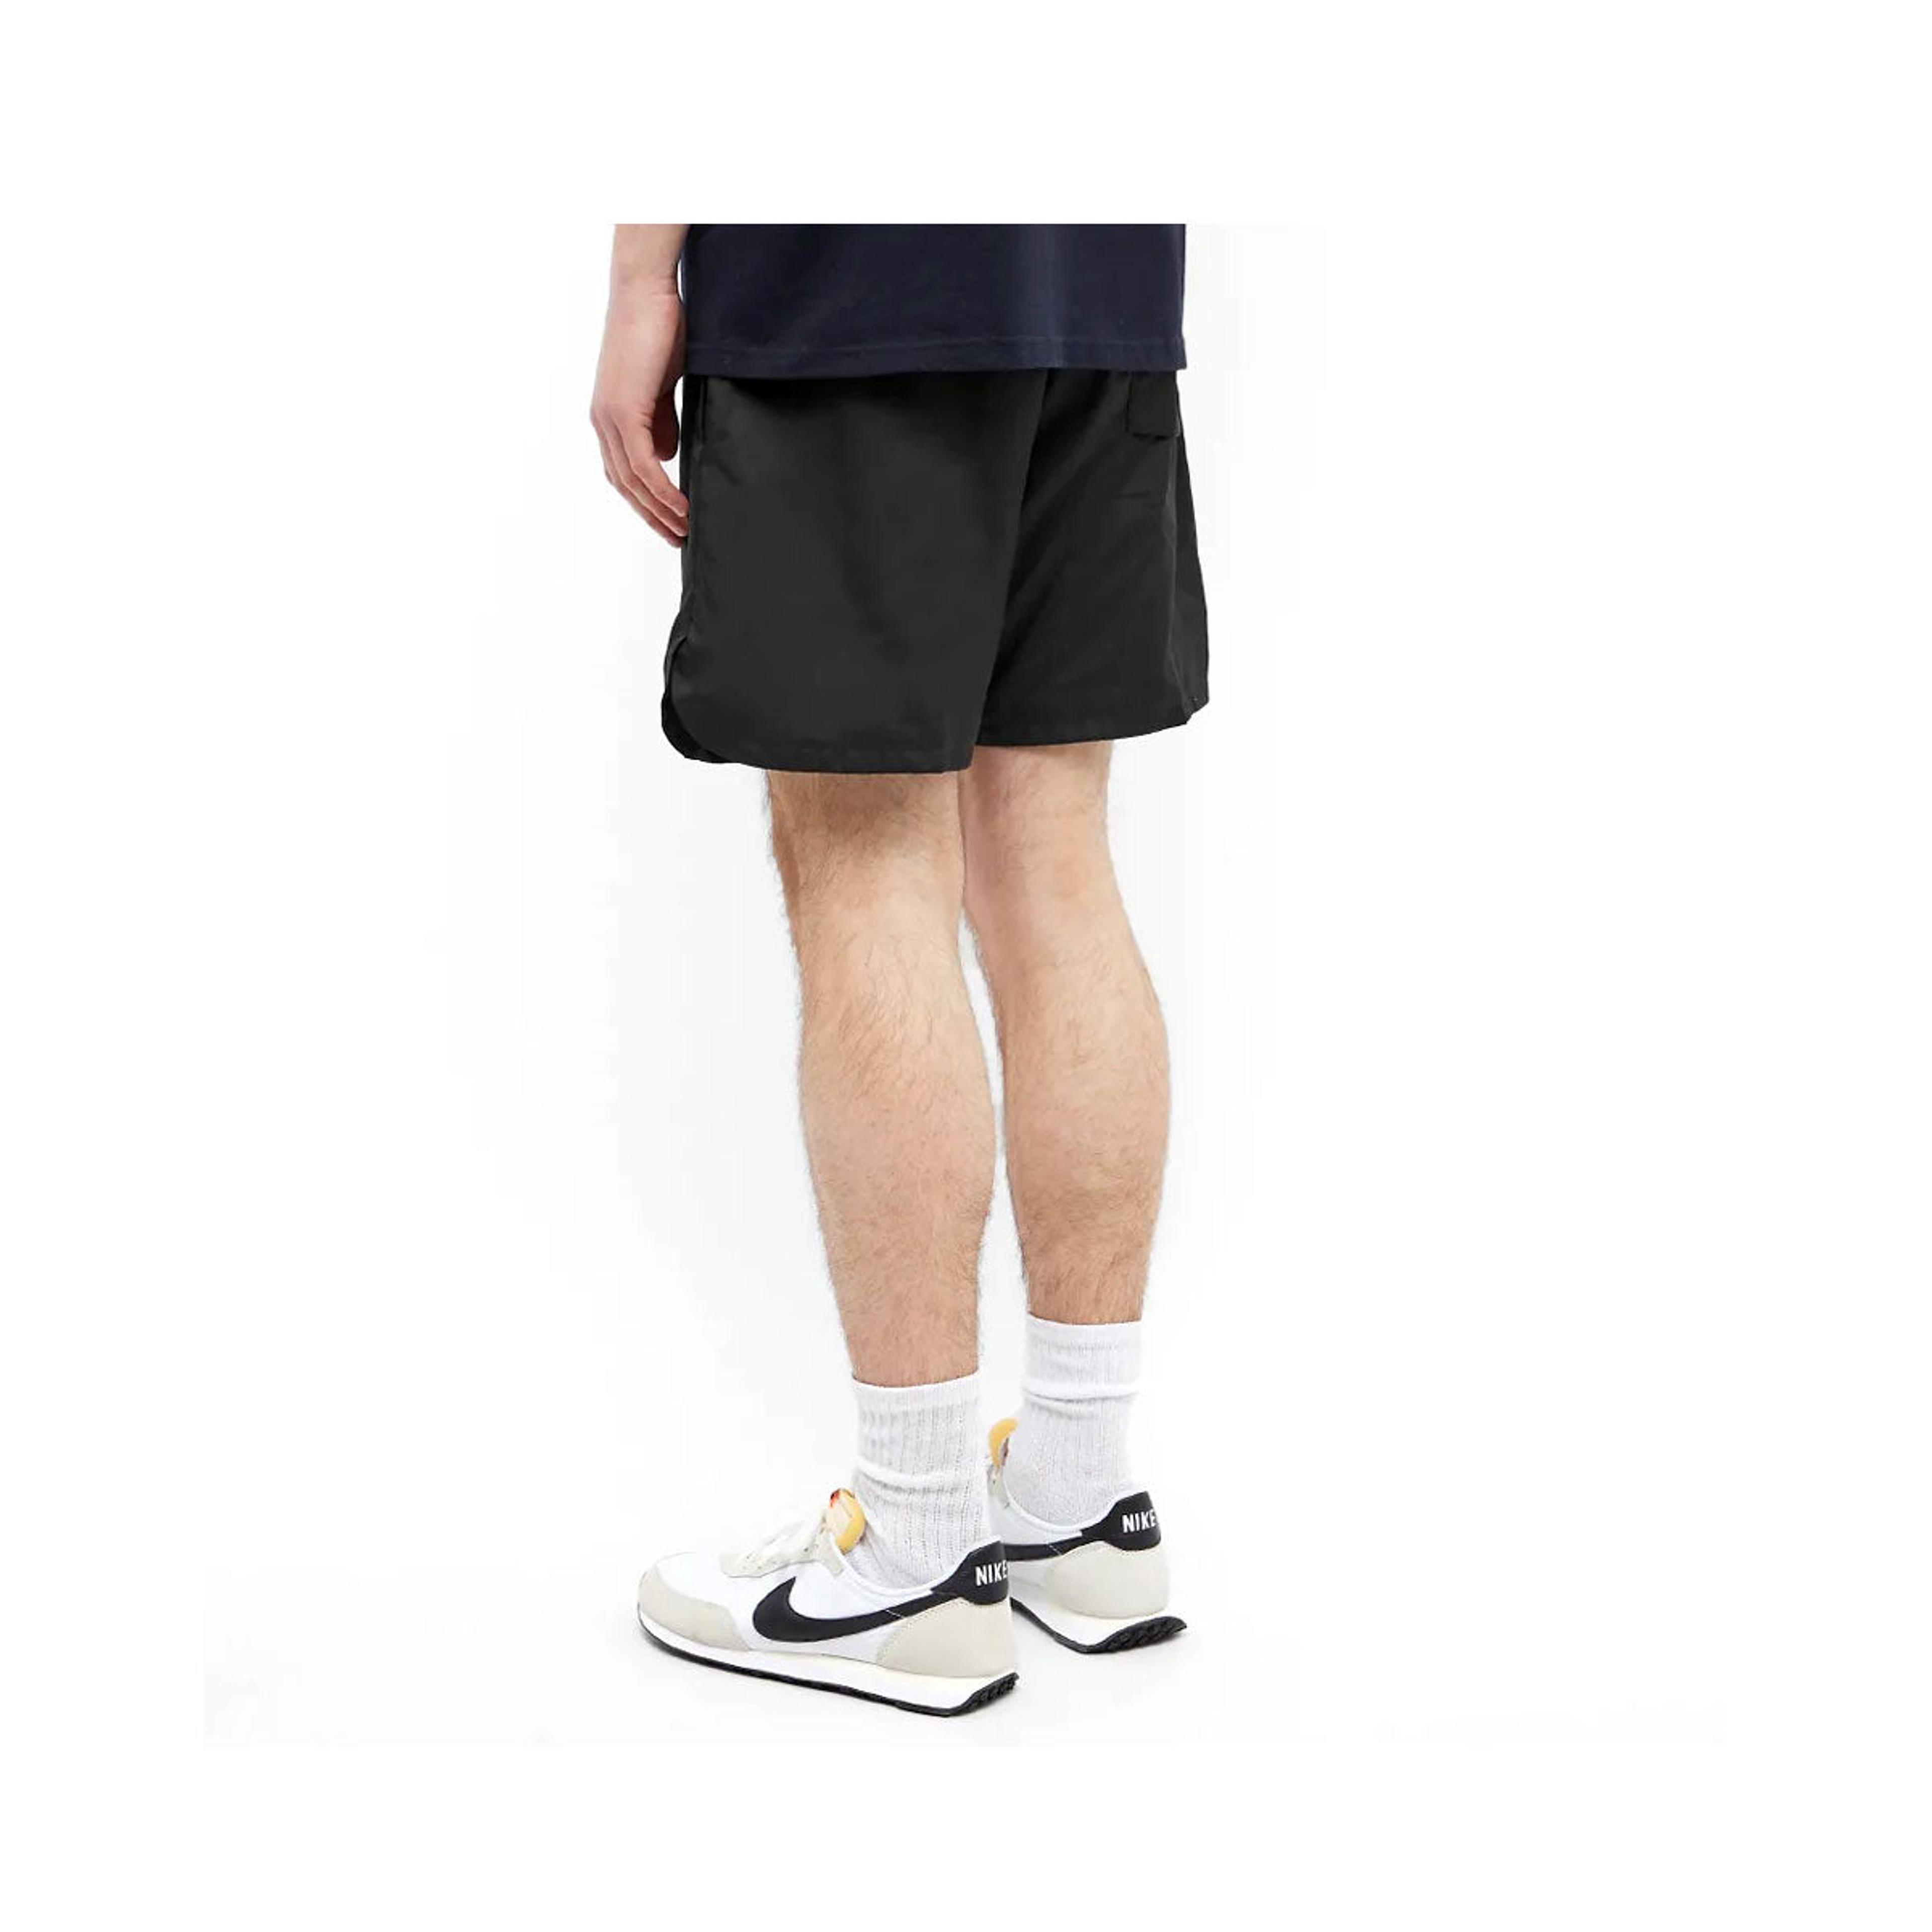 Alternate View 1 of Nike Men's Club Woven Lined Flow Short